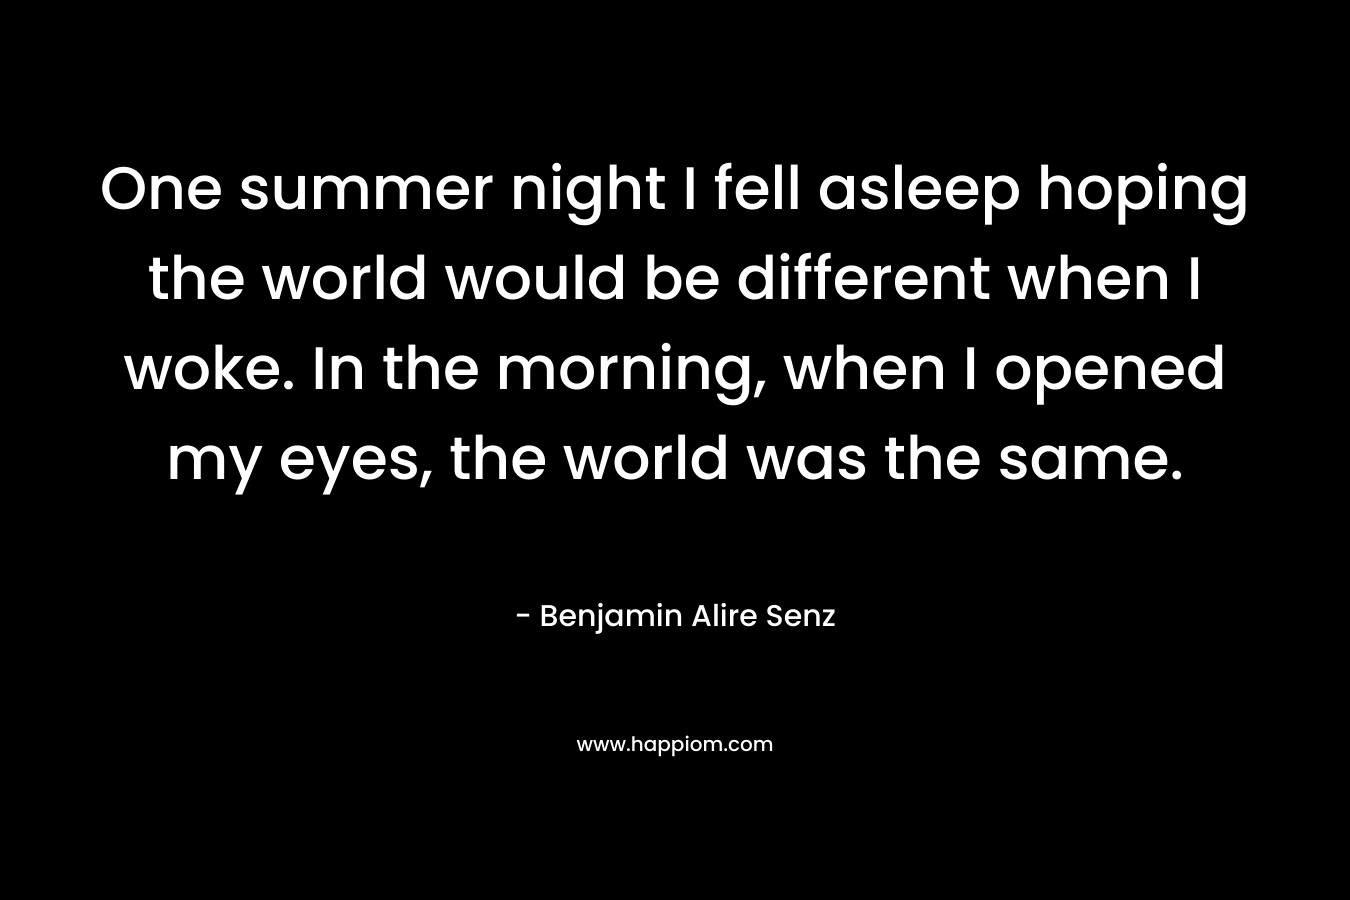 One summer night I fell asleep hoping the world would be different when I woke. In the morning, when I opened my eyes, the world was the same.